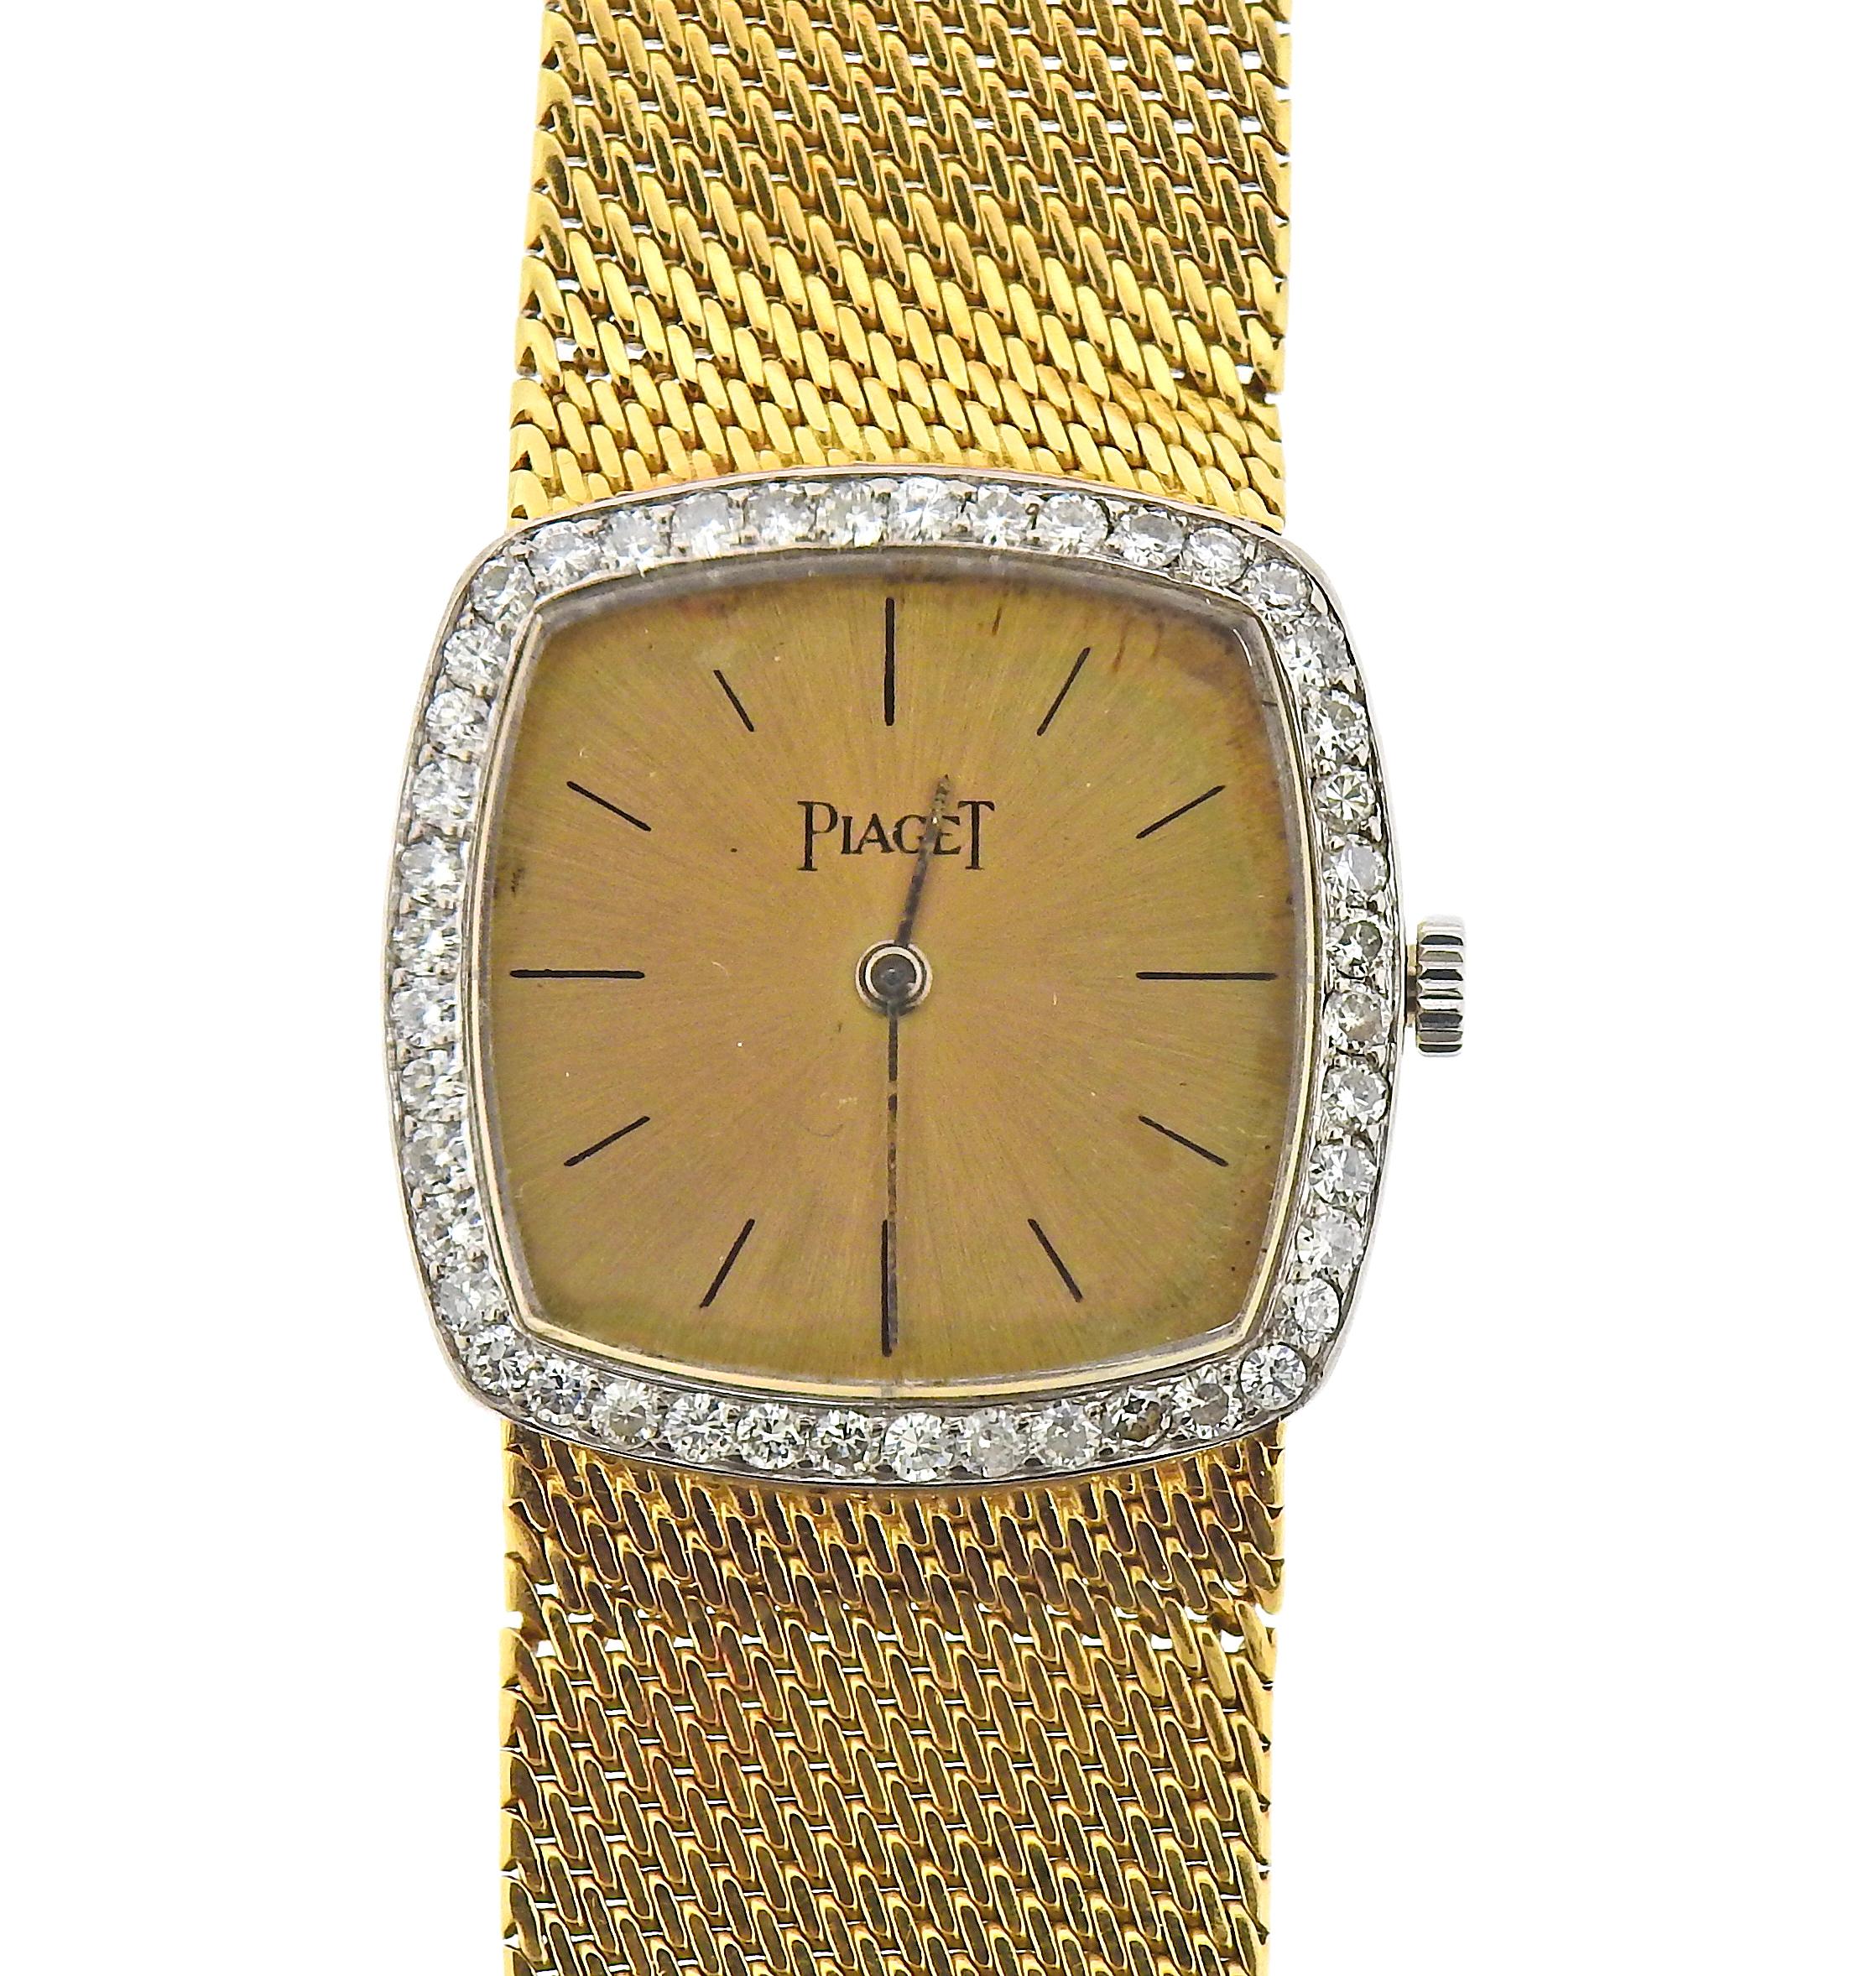 Classic Piaget 18k gold lady's watch, decorated with diamonds on the bezel, with manual wind movement. Case is 23mm x 23mm, excl the crown, bracelet is 6 6/8